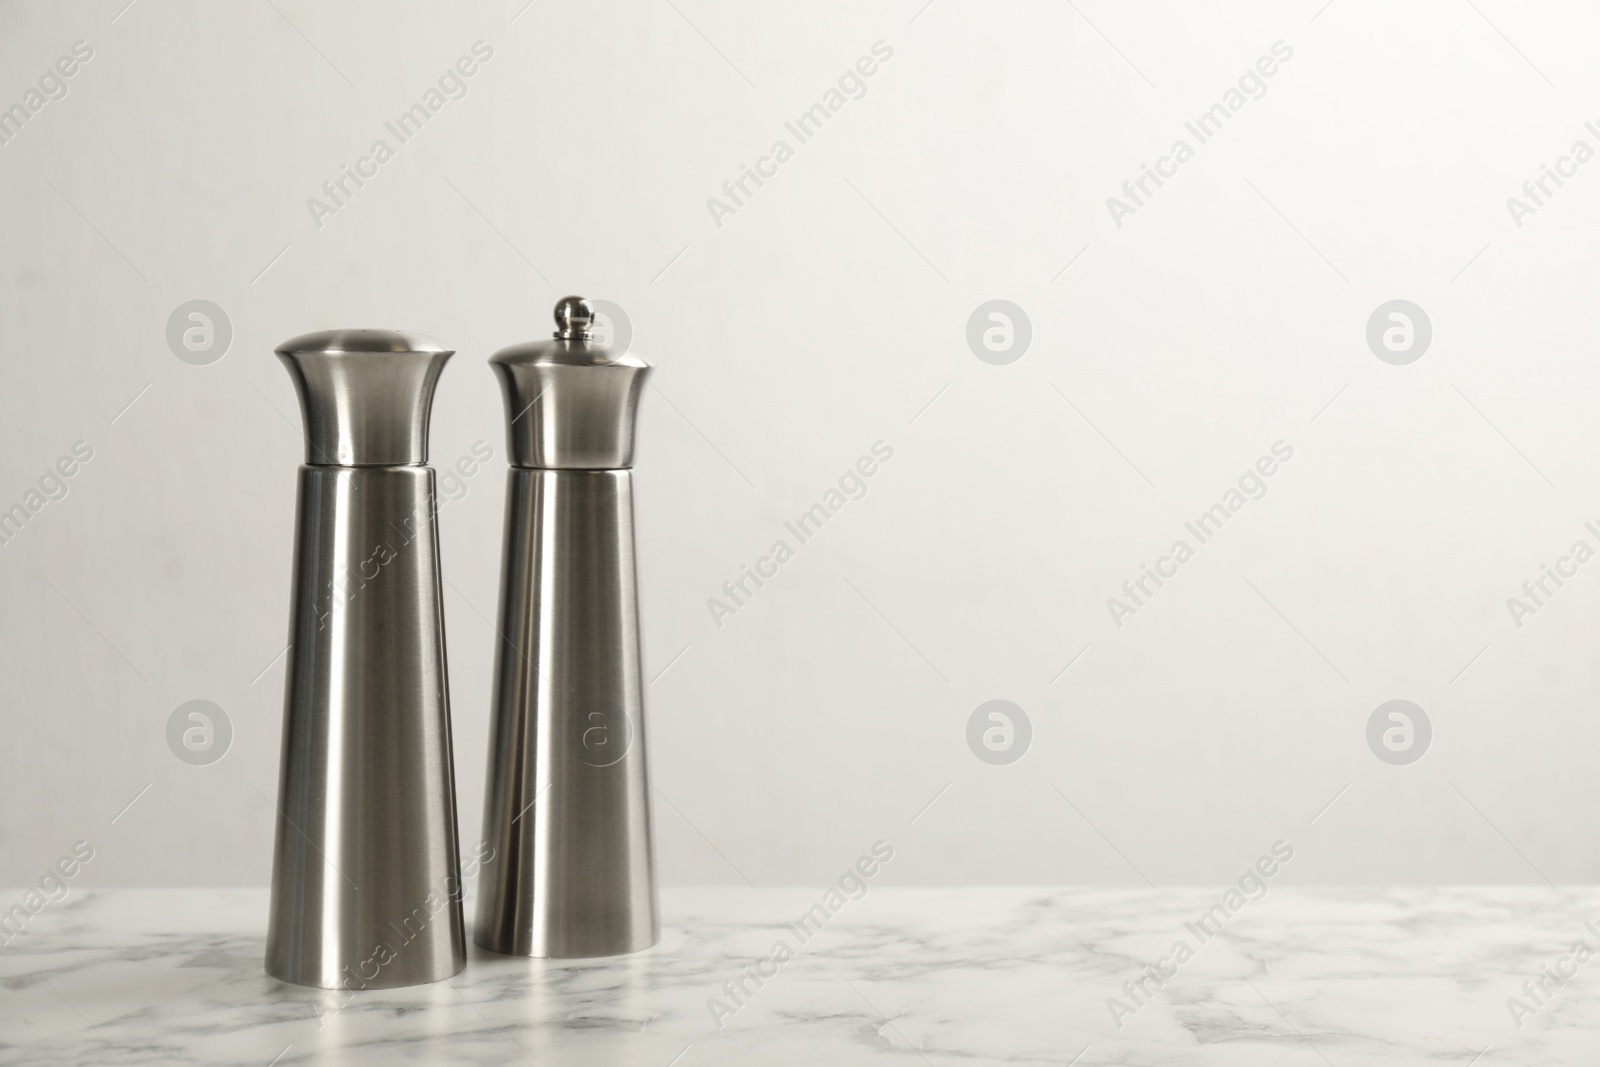 Photo of Stainless salt and pepper shakers on marble table against white background. Space for text